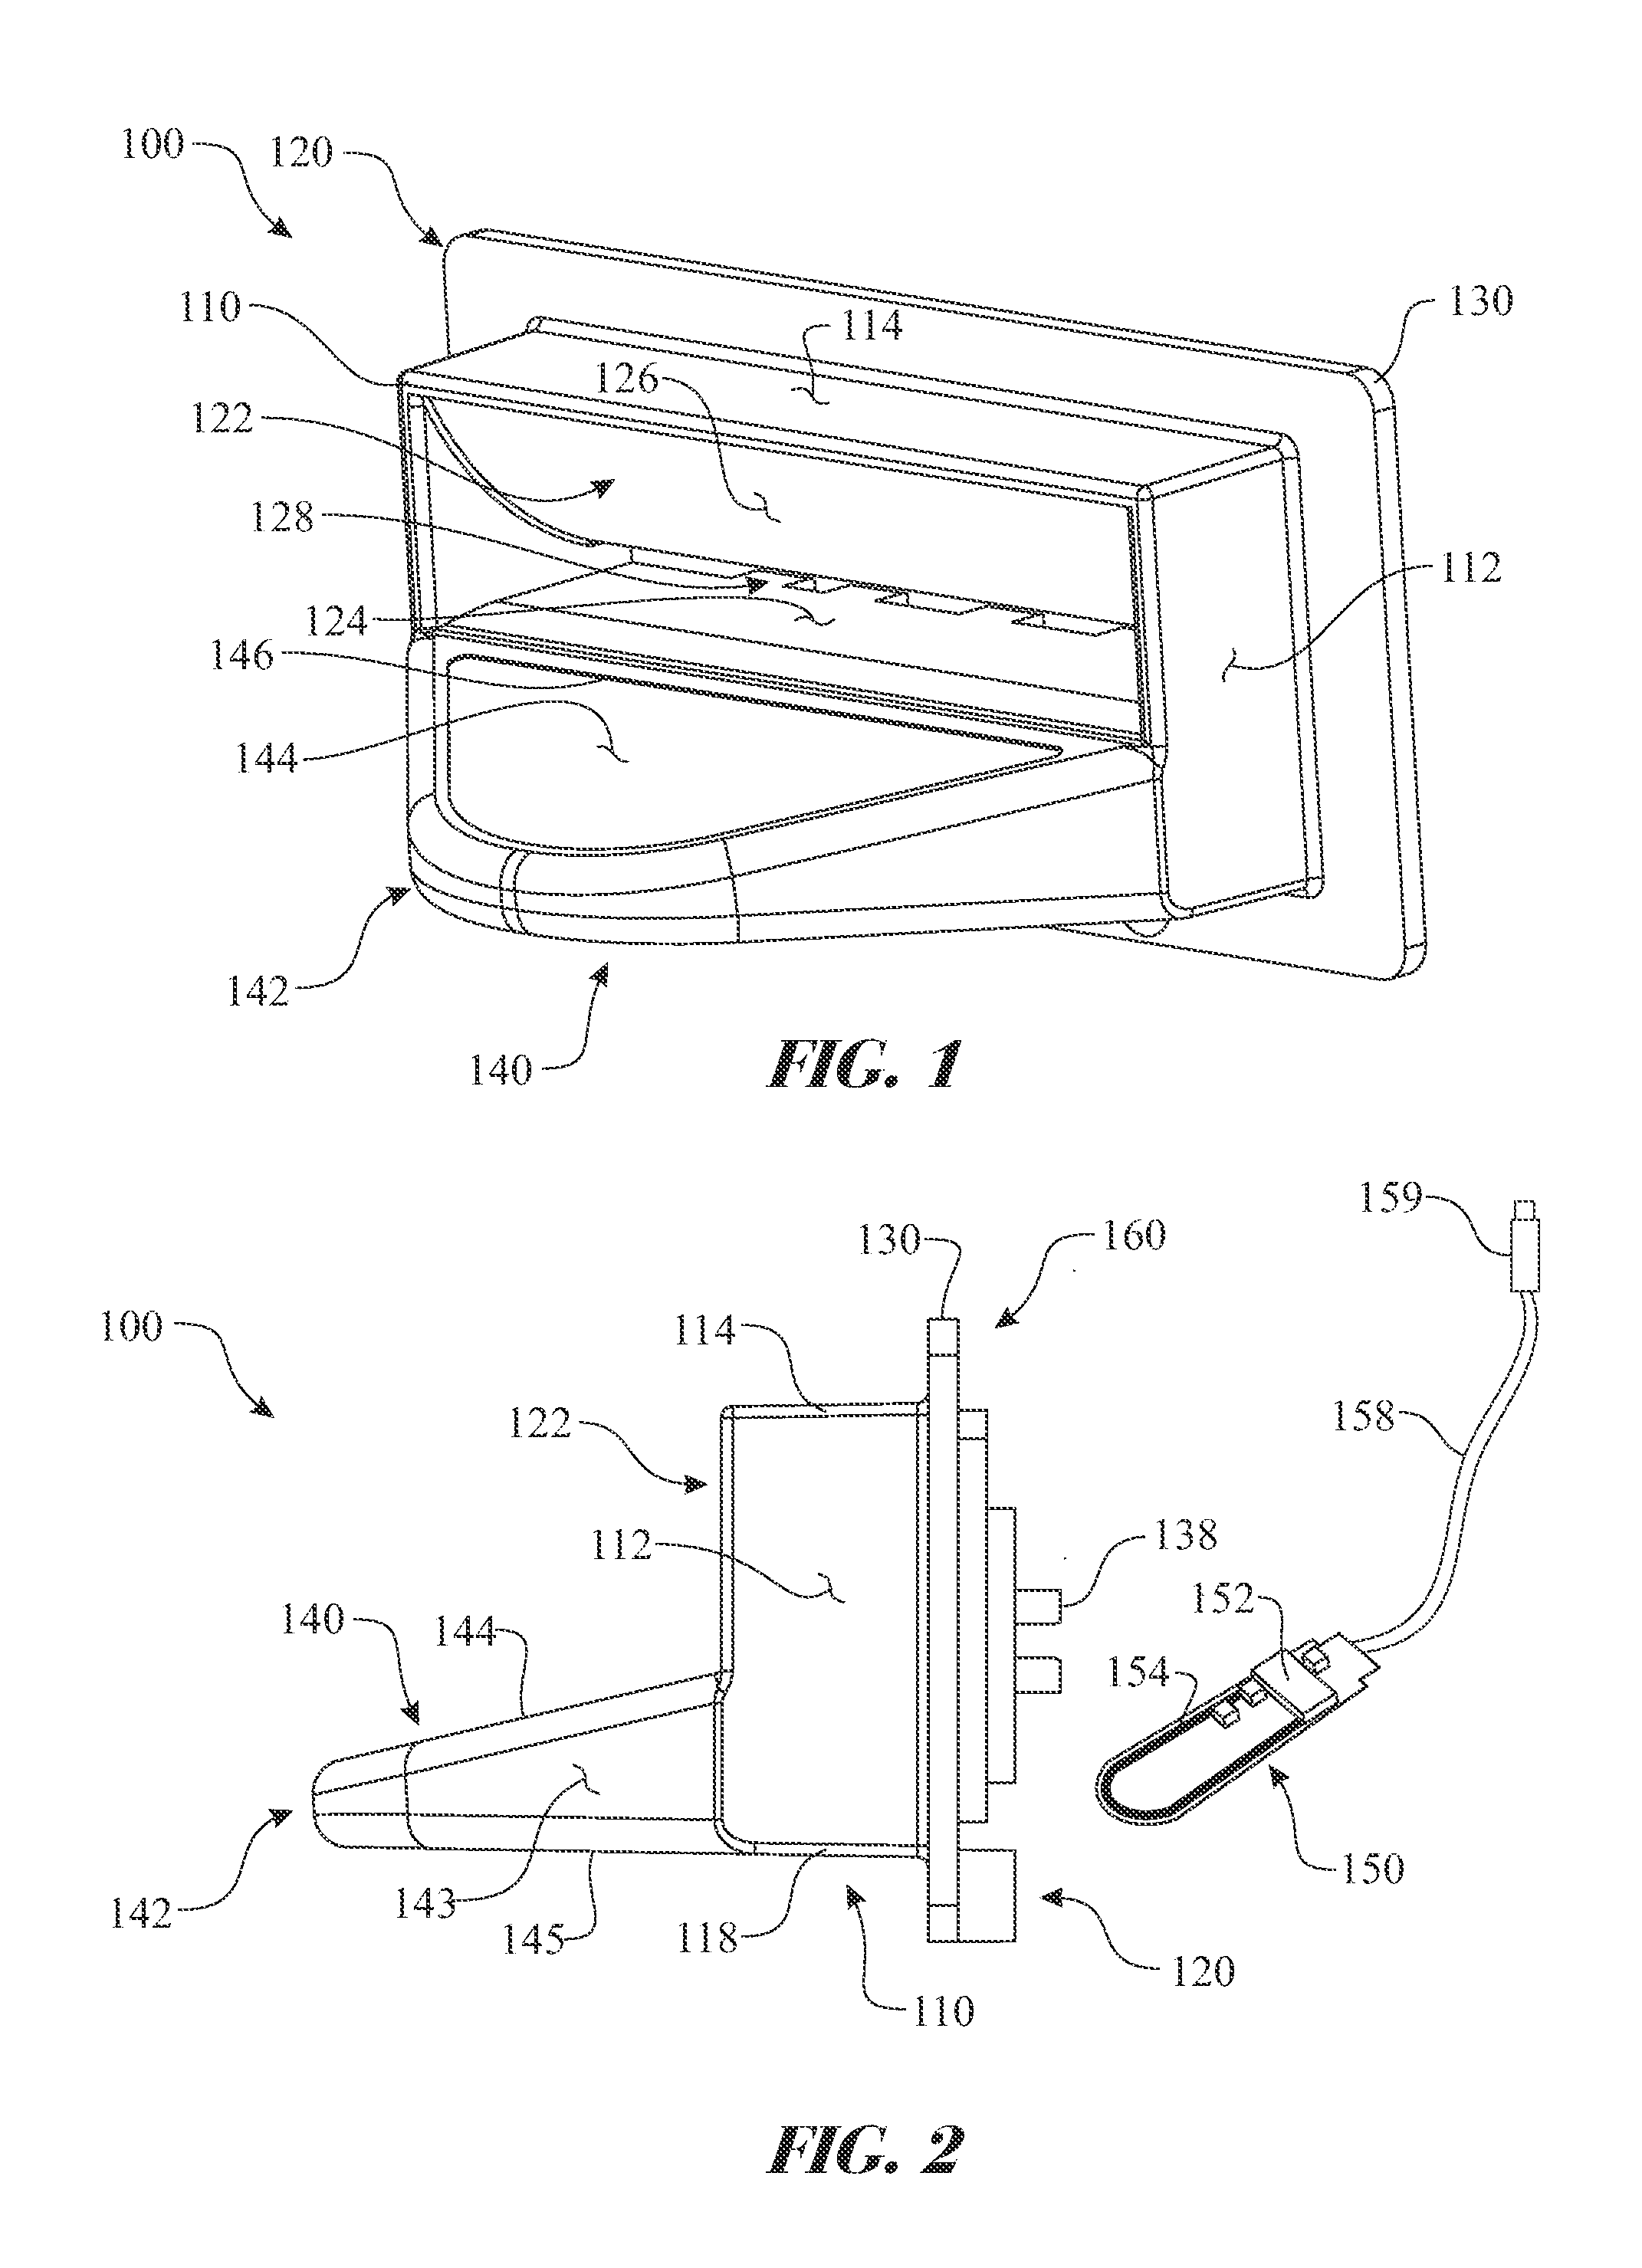 Bezel Assembly For Use with An Automated Transaction Device